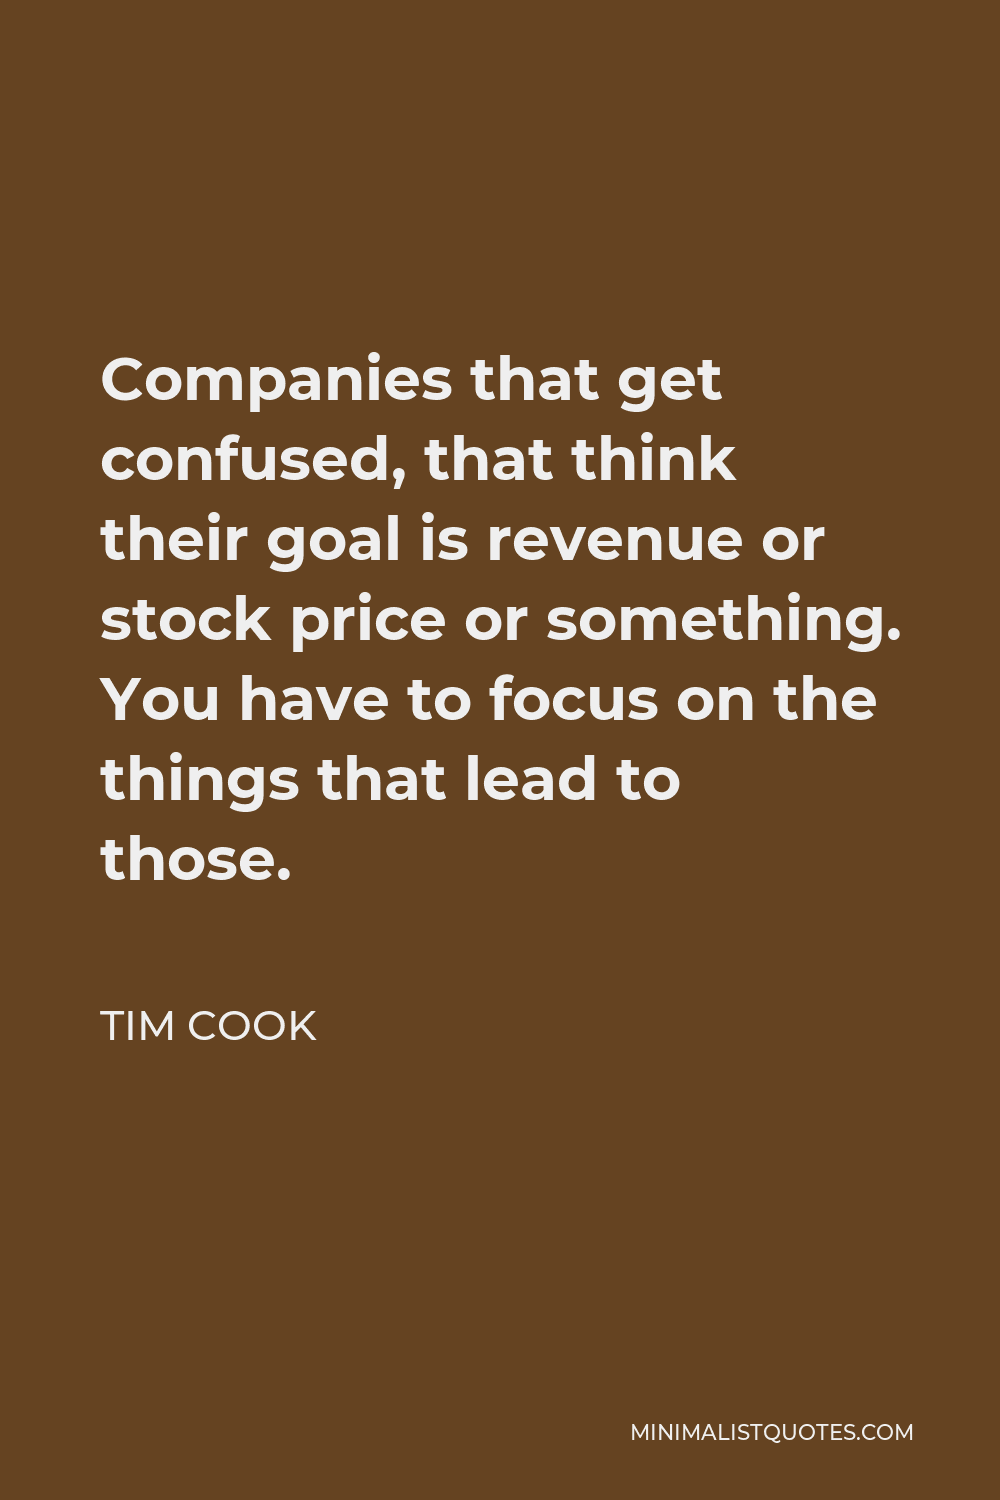 Tim Cook Quote - Companies that get confused, that think their goal is revenue or stock price or something. You have to focus on the things that lead to those.